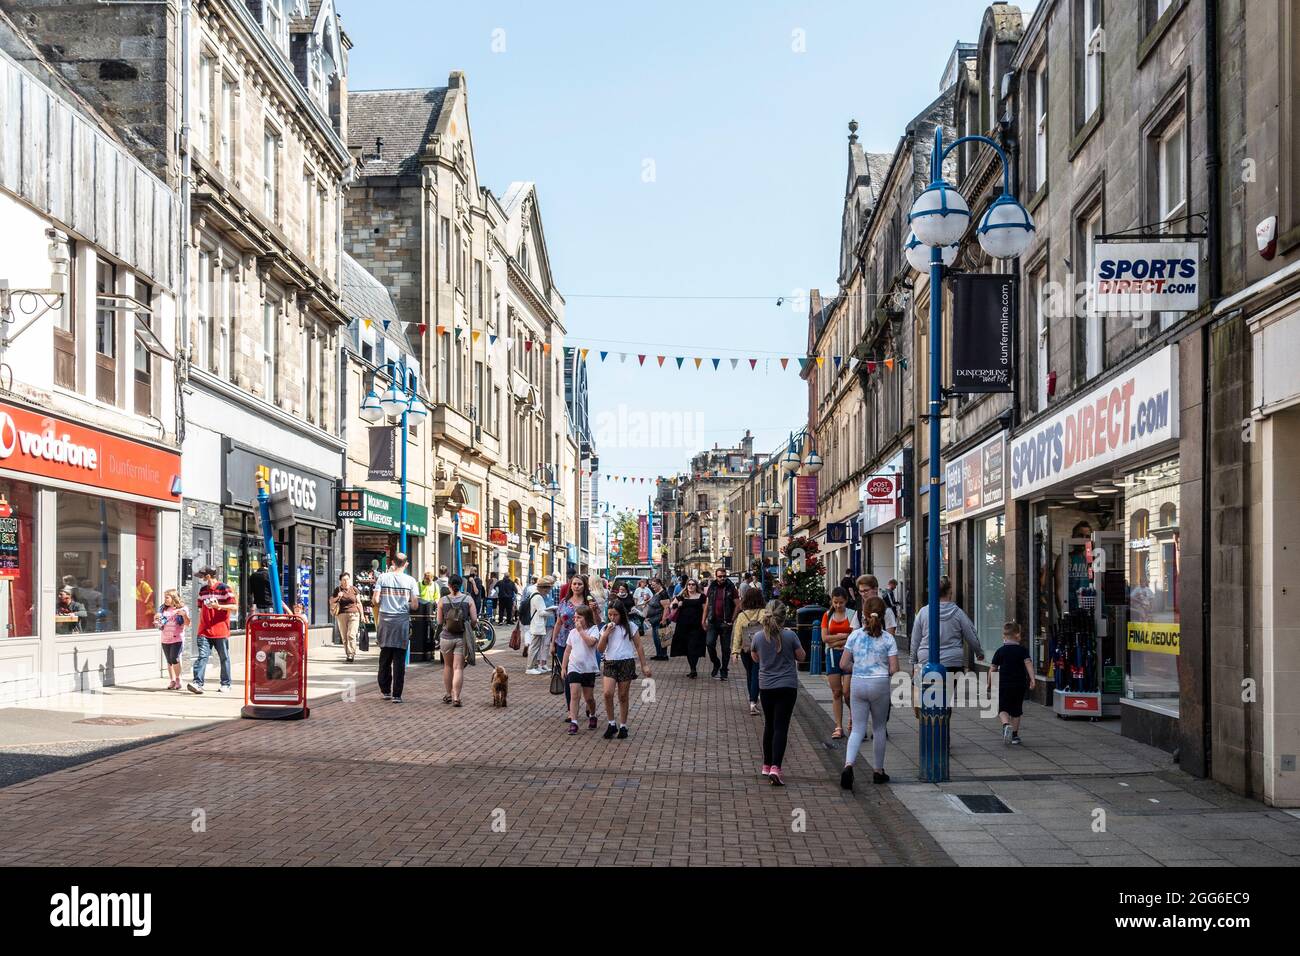 Shoppers on a Summer Saturday in the bustling pedestrianised High Street in Dunfermline, Fife, Scotland. Men, women and children outside shops. Stock Photo